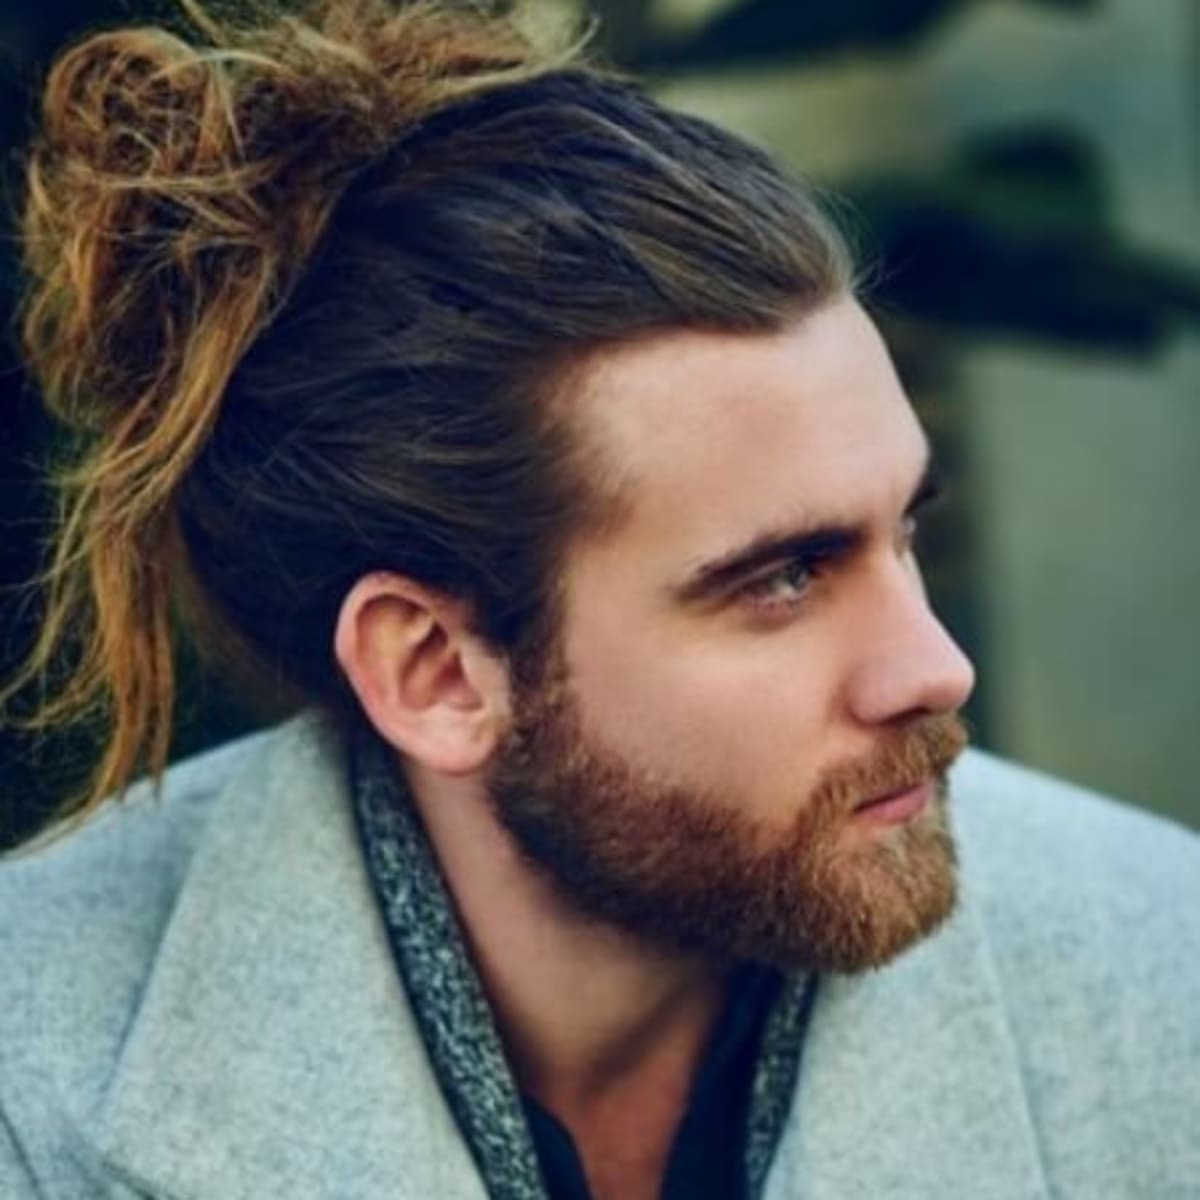 Man Bun Beard Hairstyles Guide: Pictures, Advice, How To Style - Official  Thread